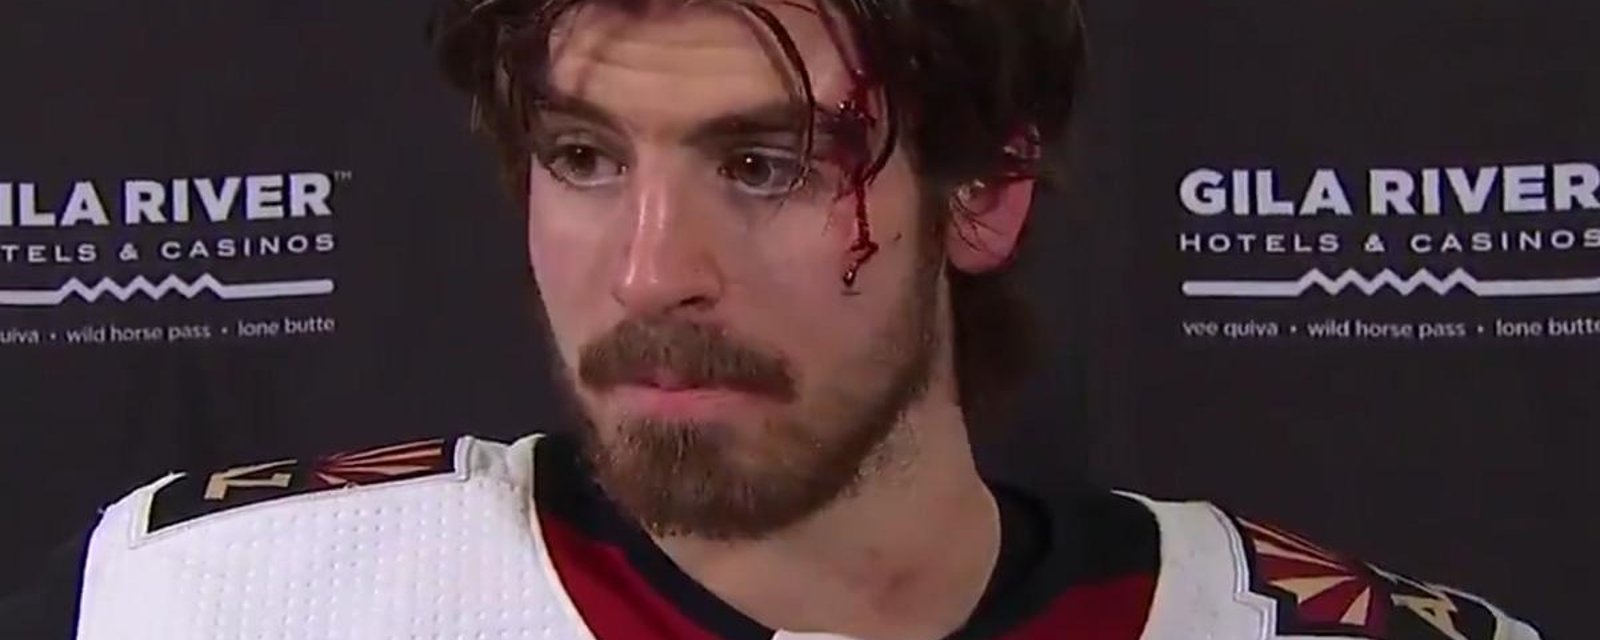 Garland gives post game interview while still bleeding from his face.